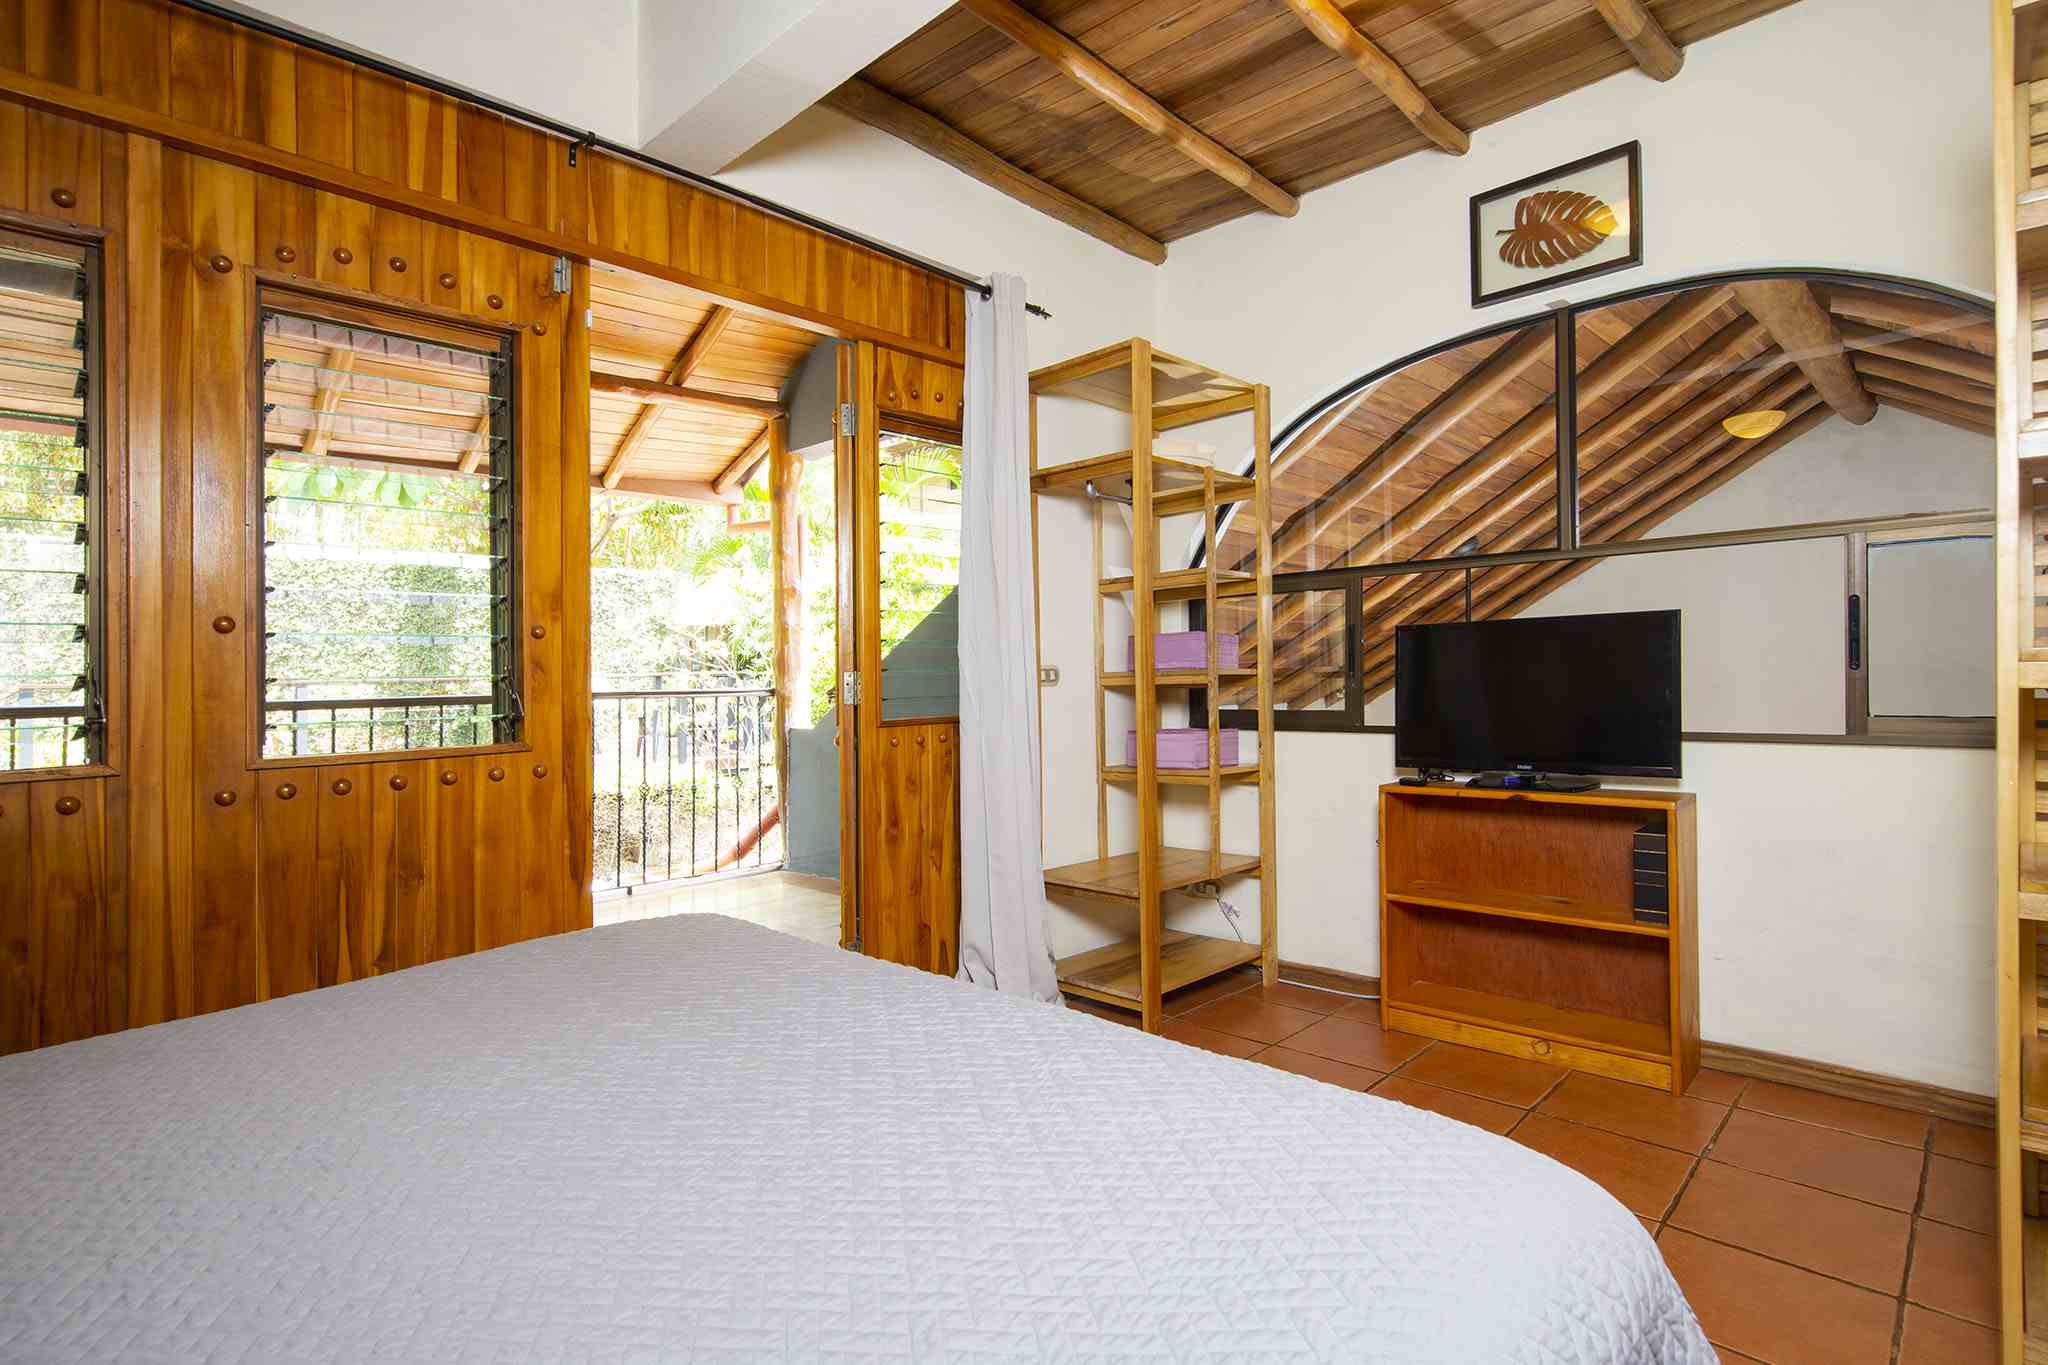 Houses for sale in Costa Rica’s Calle Real